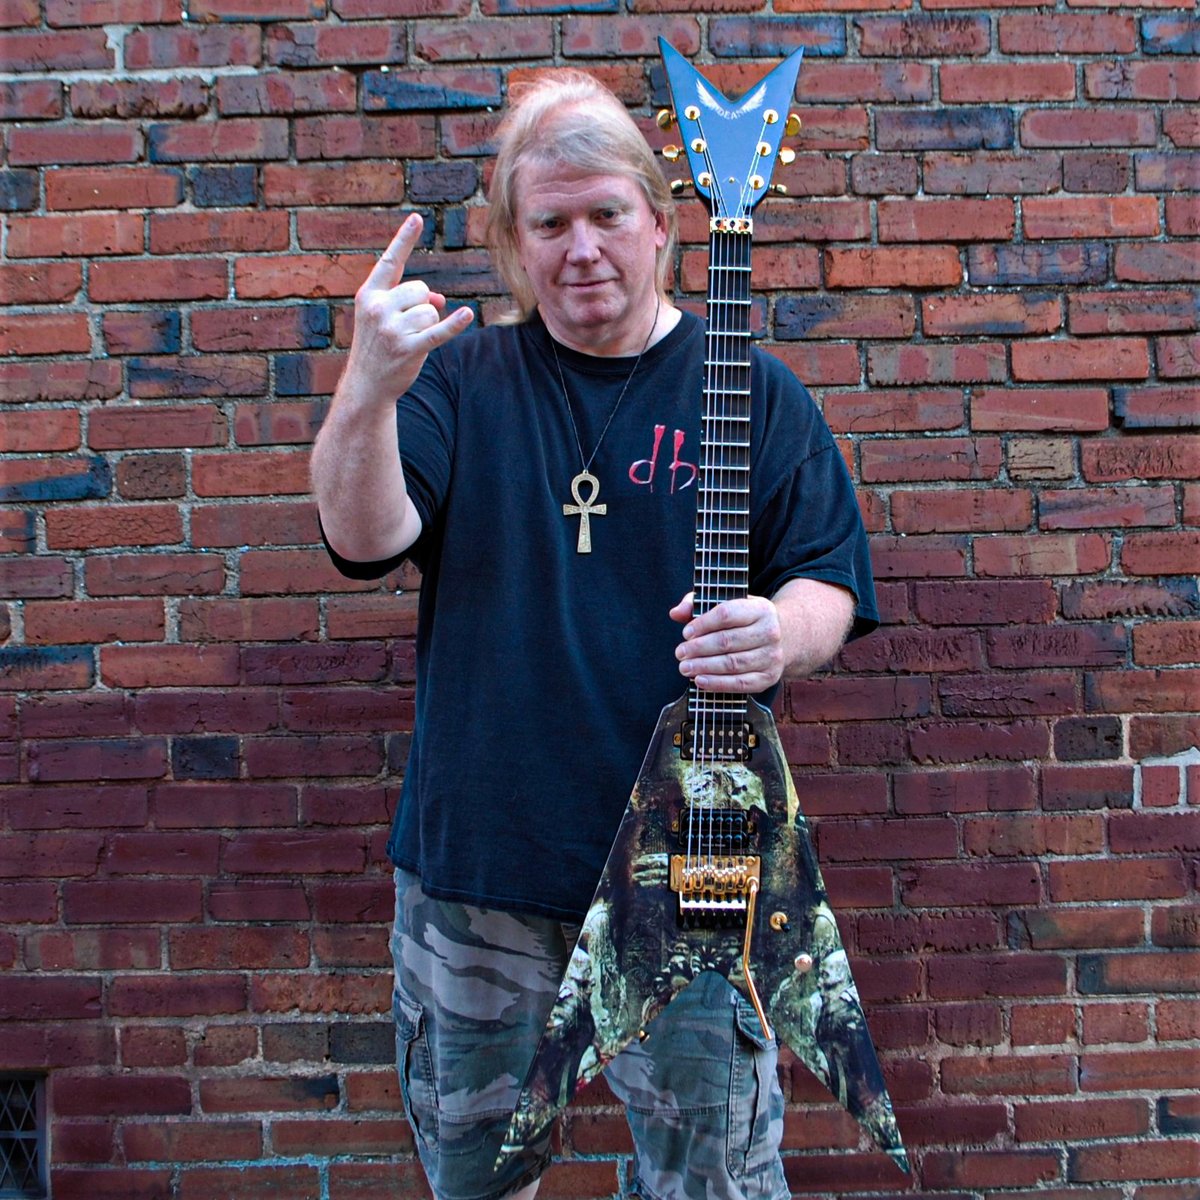 Starting this week off with another legendary birthday. Let's share some love for #DeanGuitars artist, Karl Sanders!